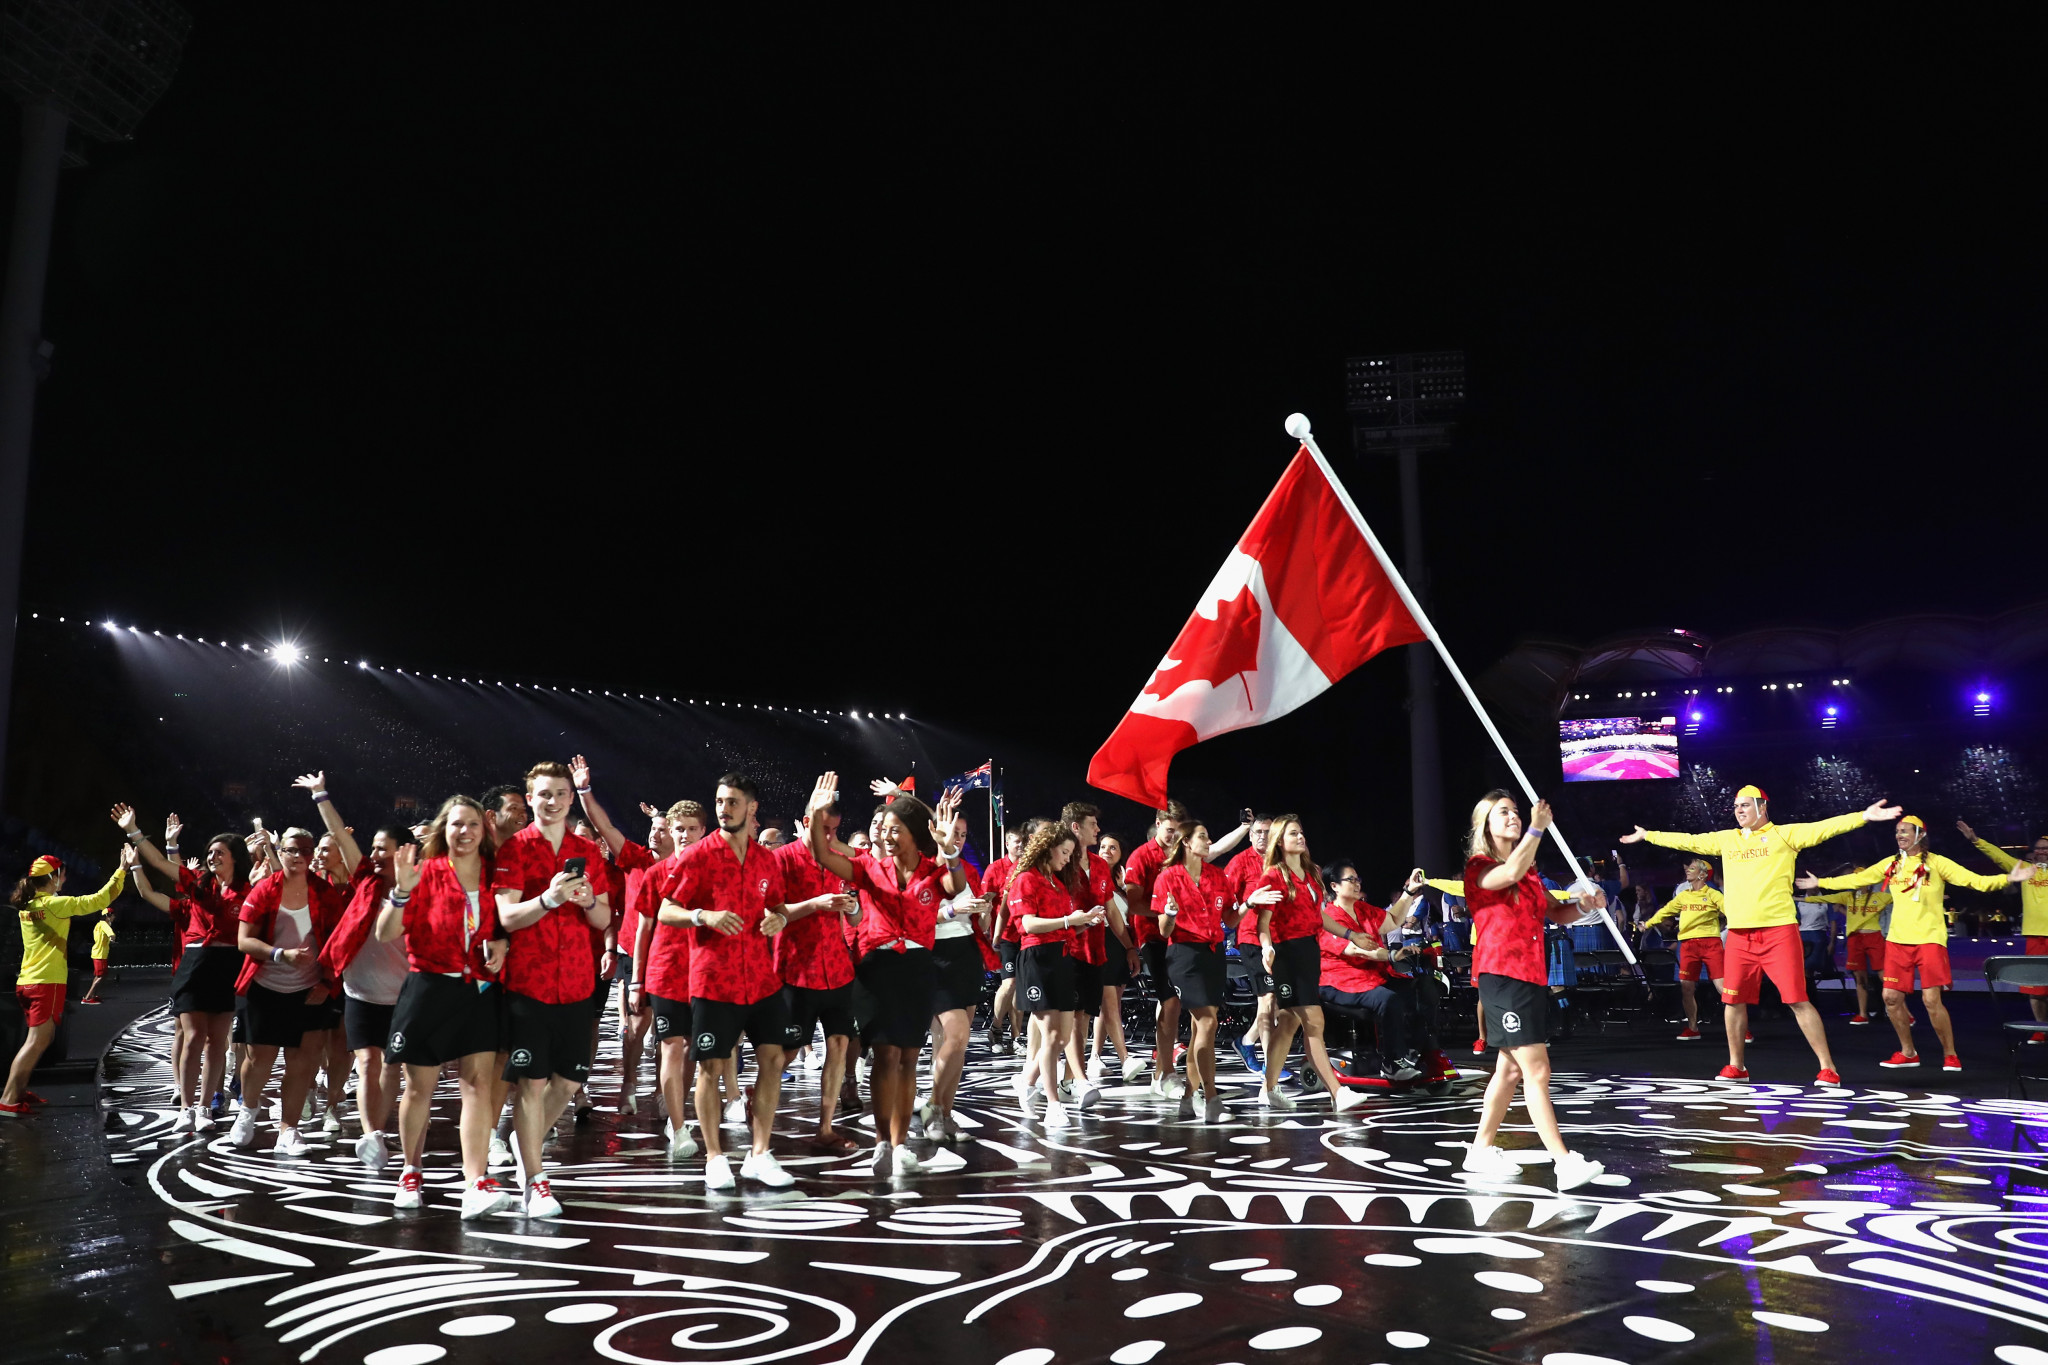 Canada to invite cities to bid for 2030 Commonwealth Games in November